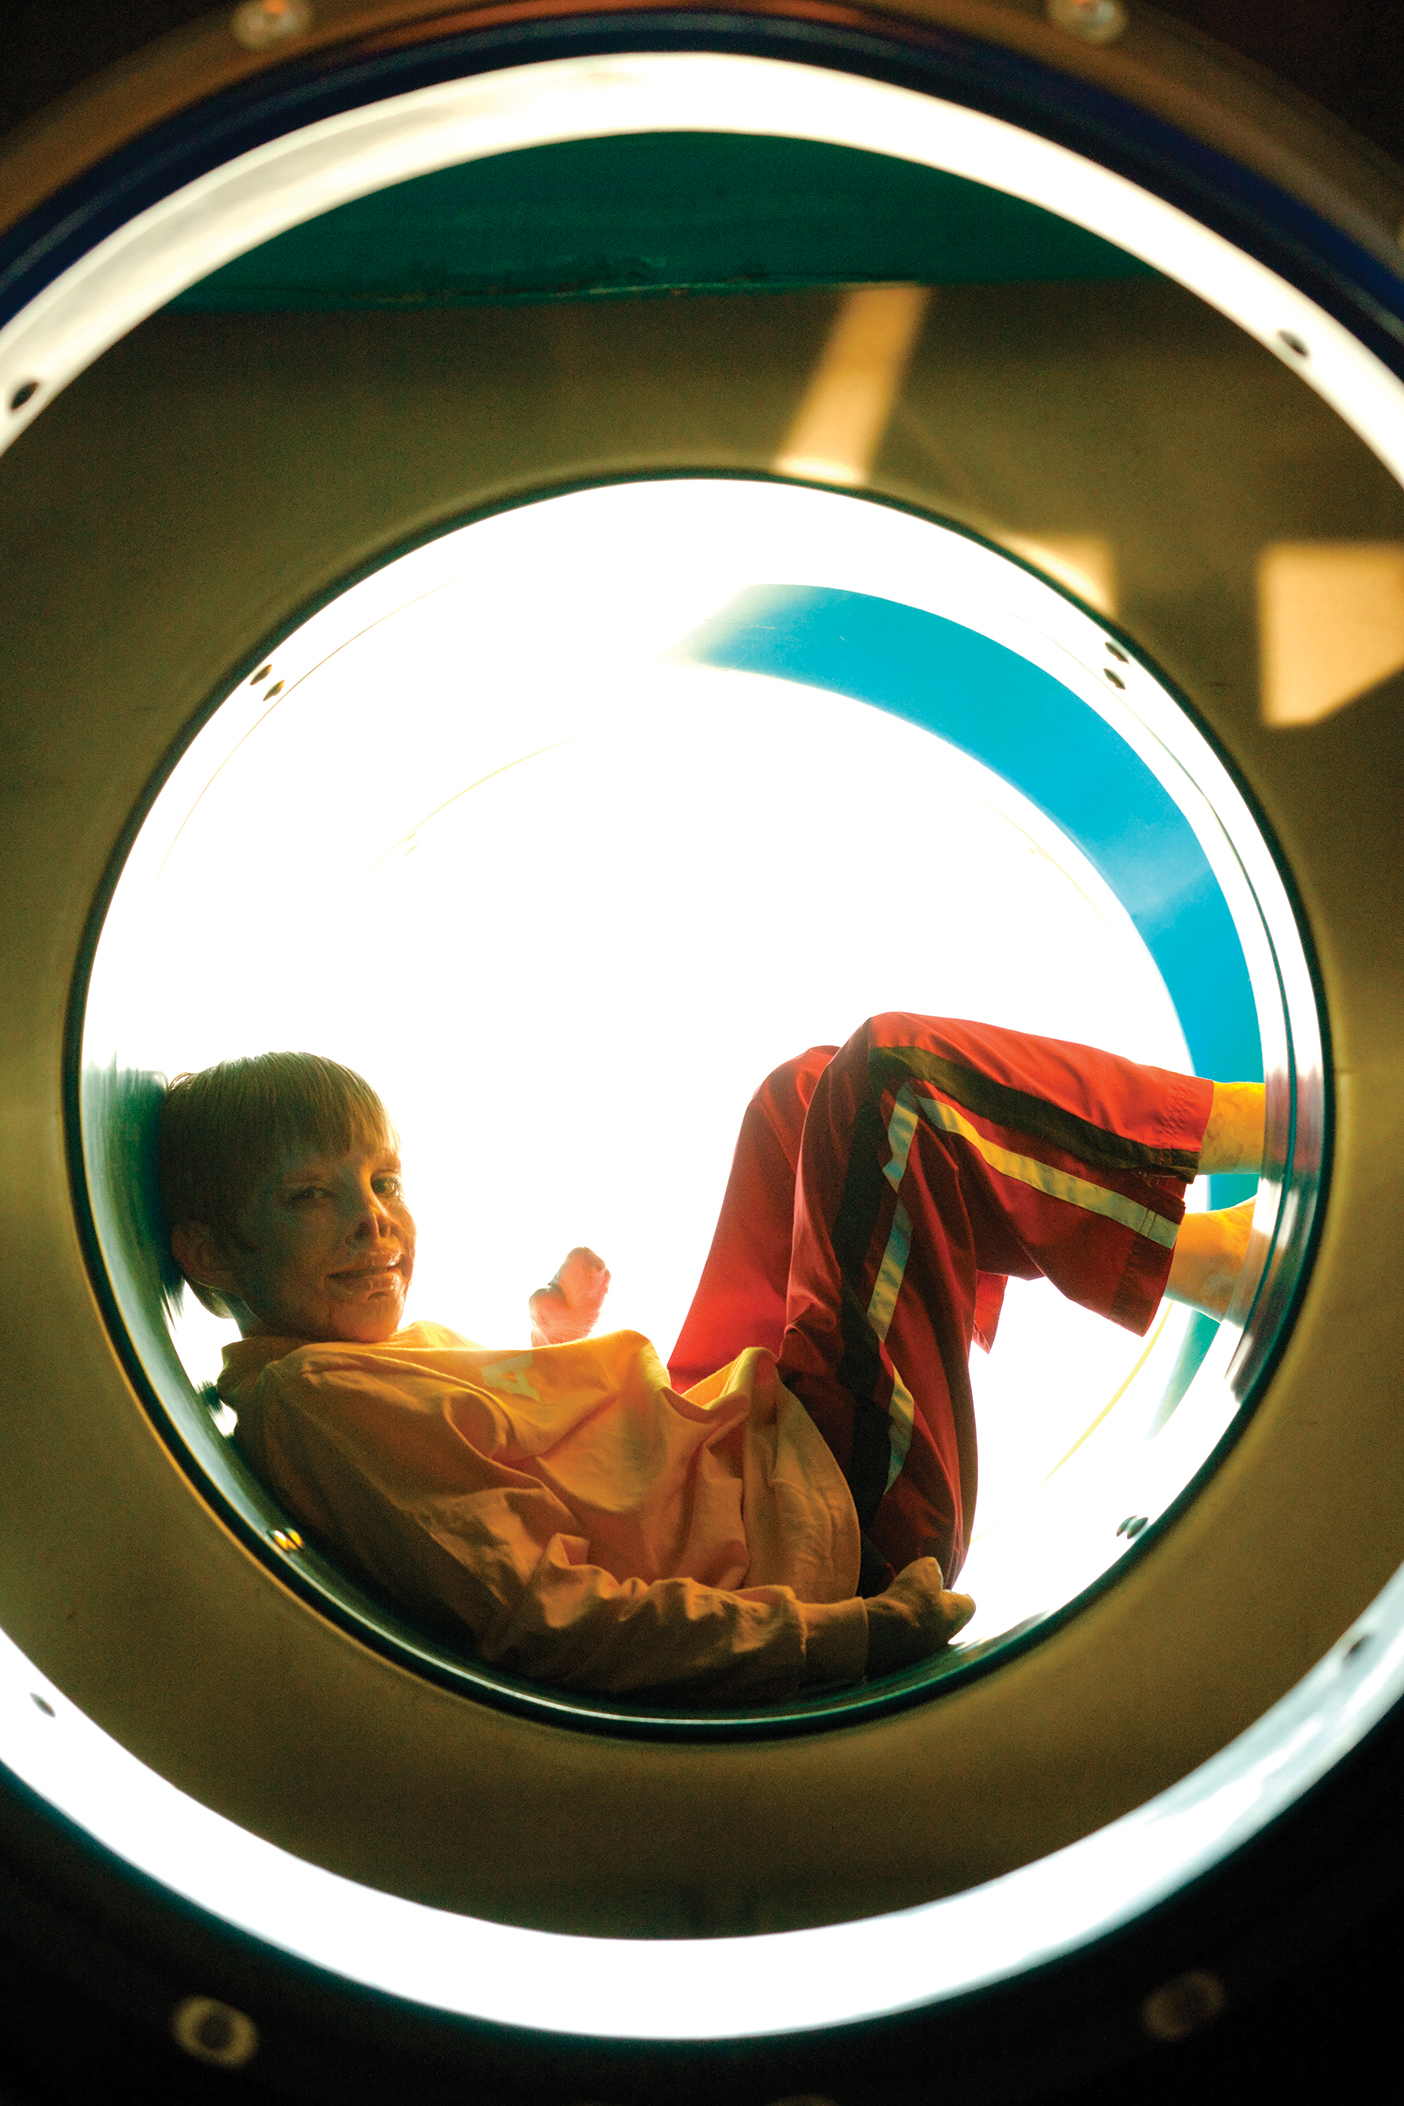 Marius sitting in a circle structure, wearing a yellow jacket and red pants